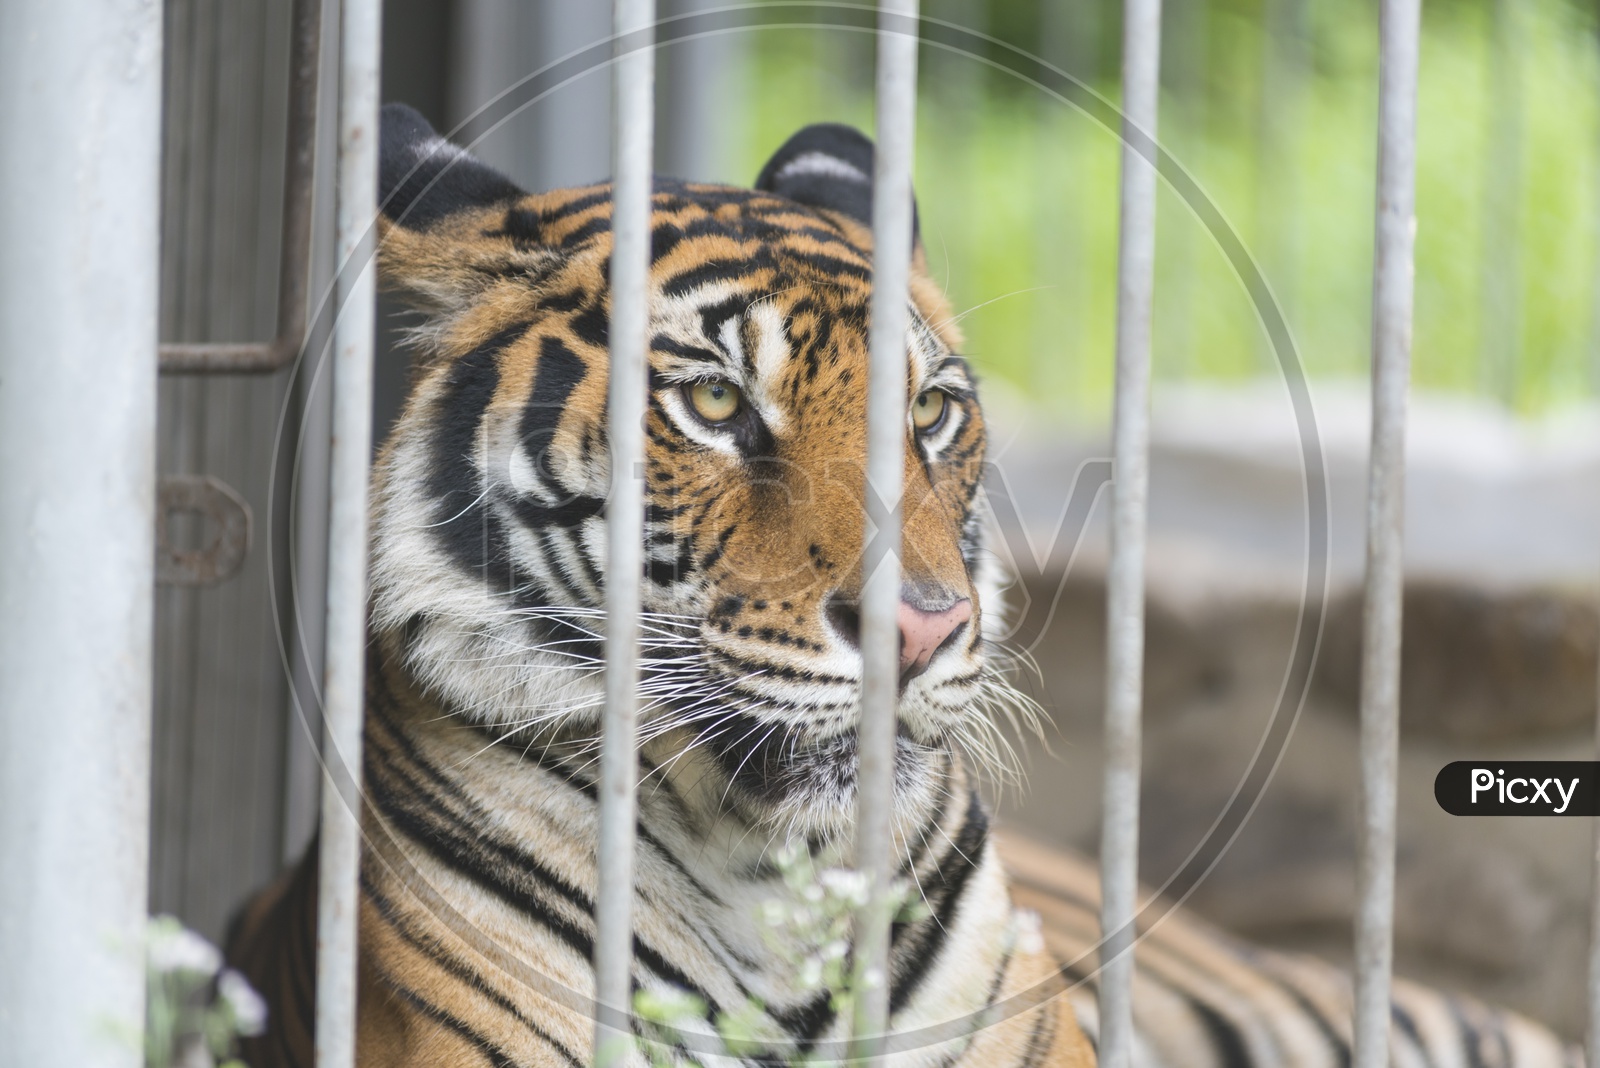 A bengal tiger in cage, Thailand Zoo